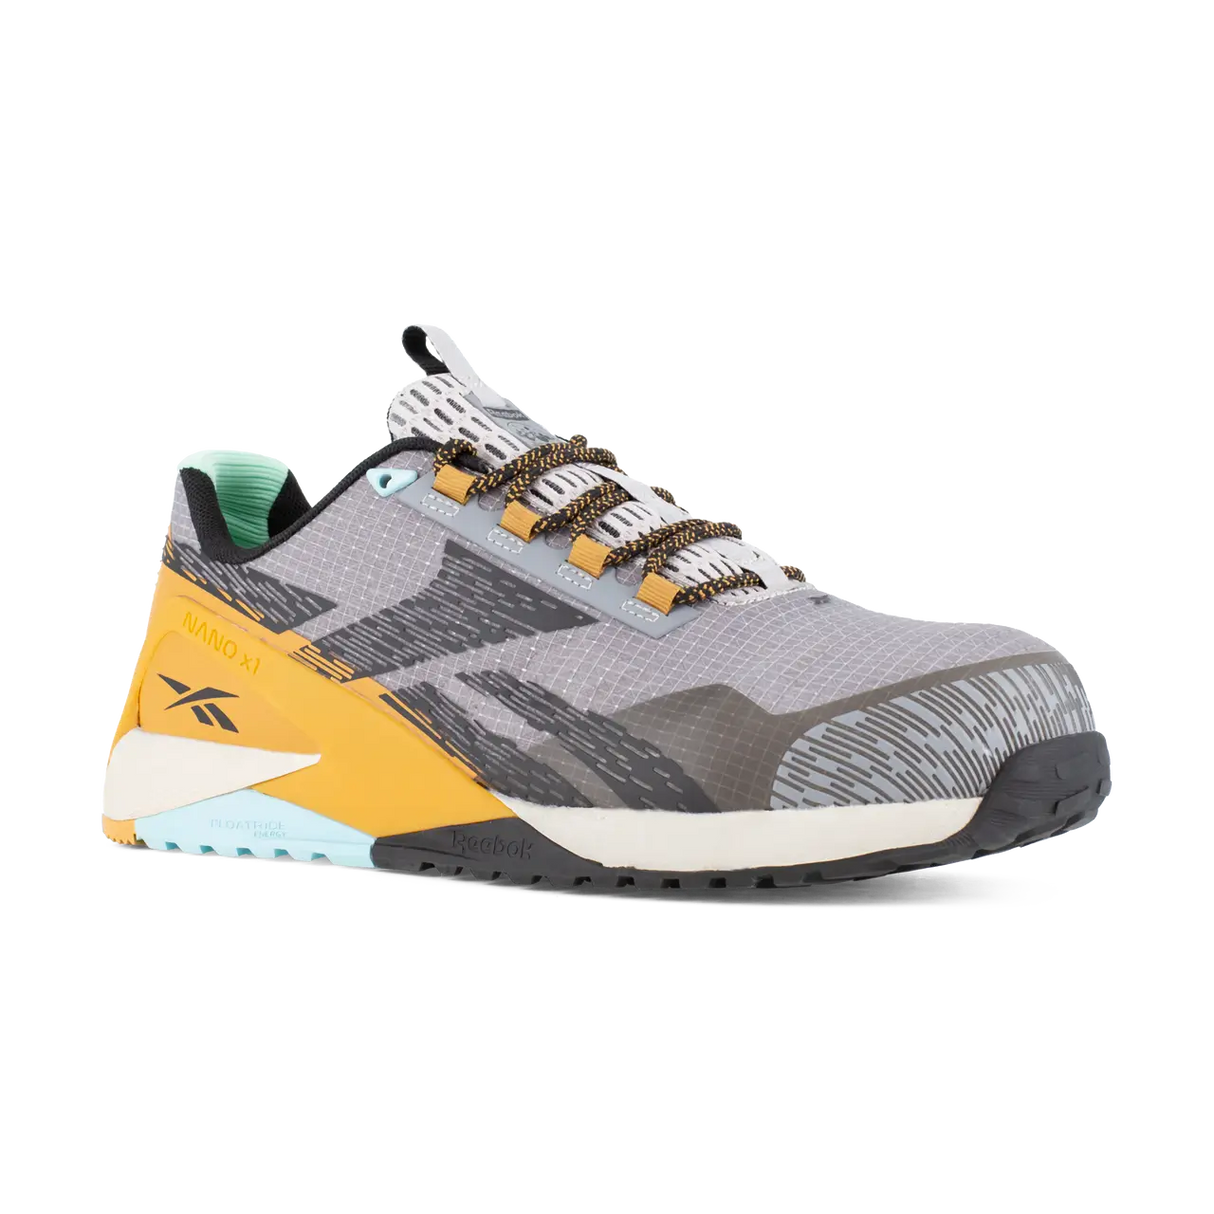 Reebok Nano X1 Adventure Work Athletic Composite Toe Silver, Grey, Clay, and Black RB348 details